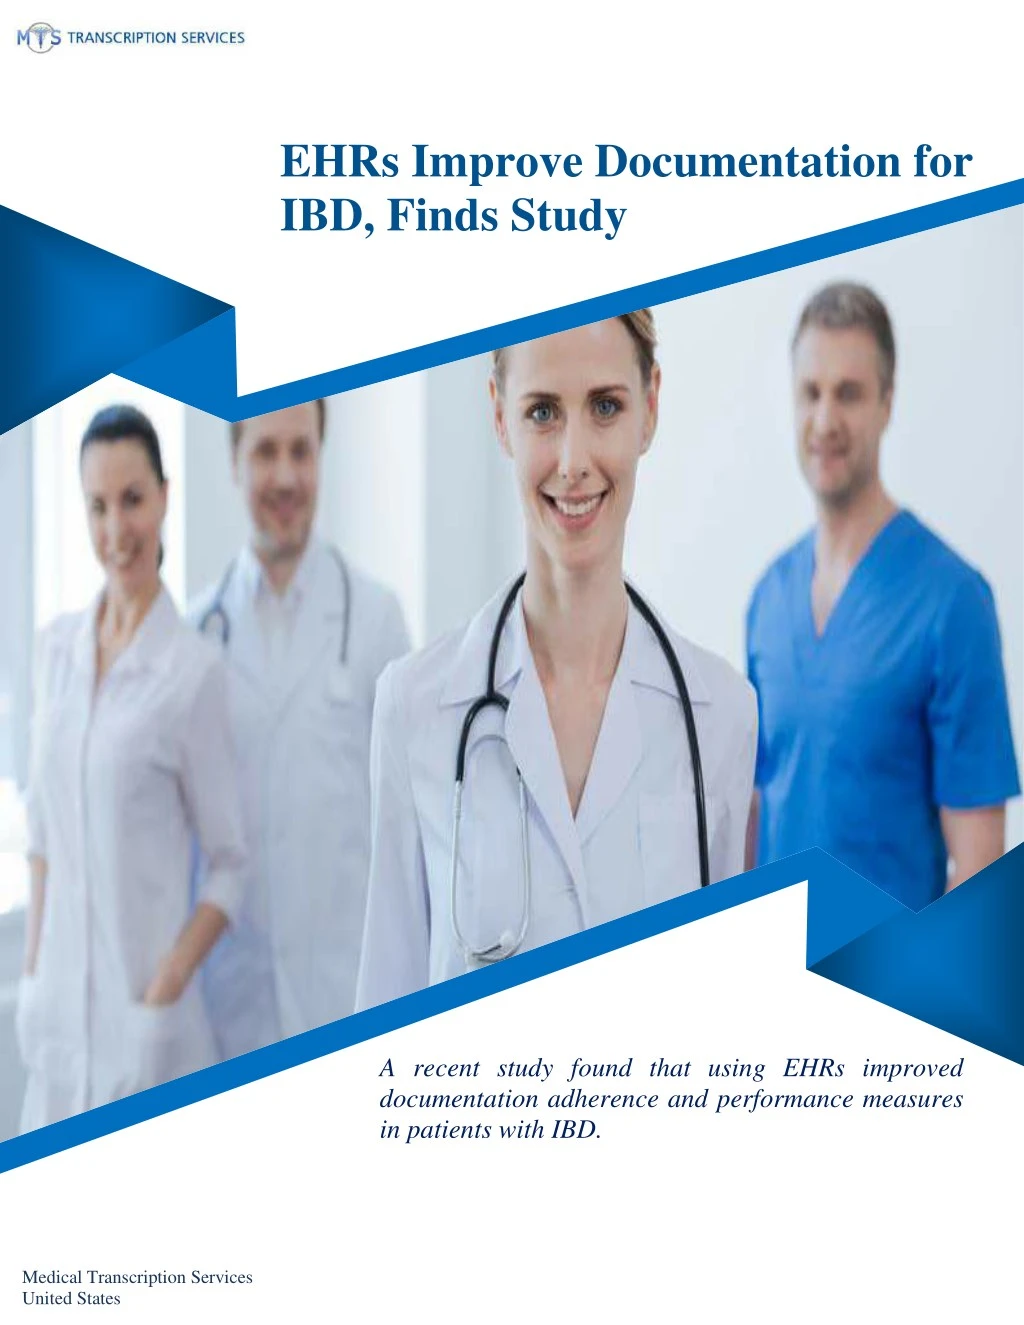 ehrs improve documentation for ibd finds study